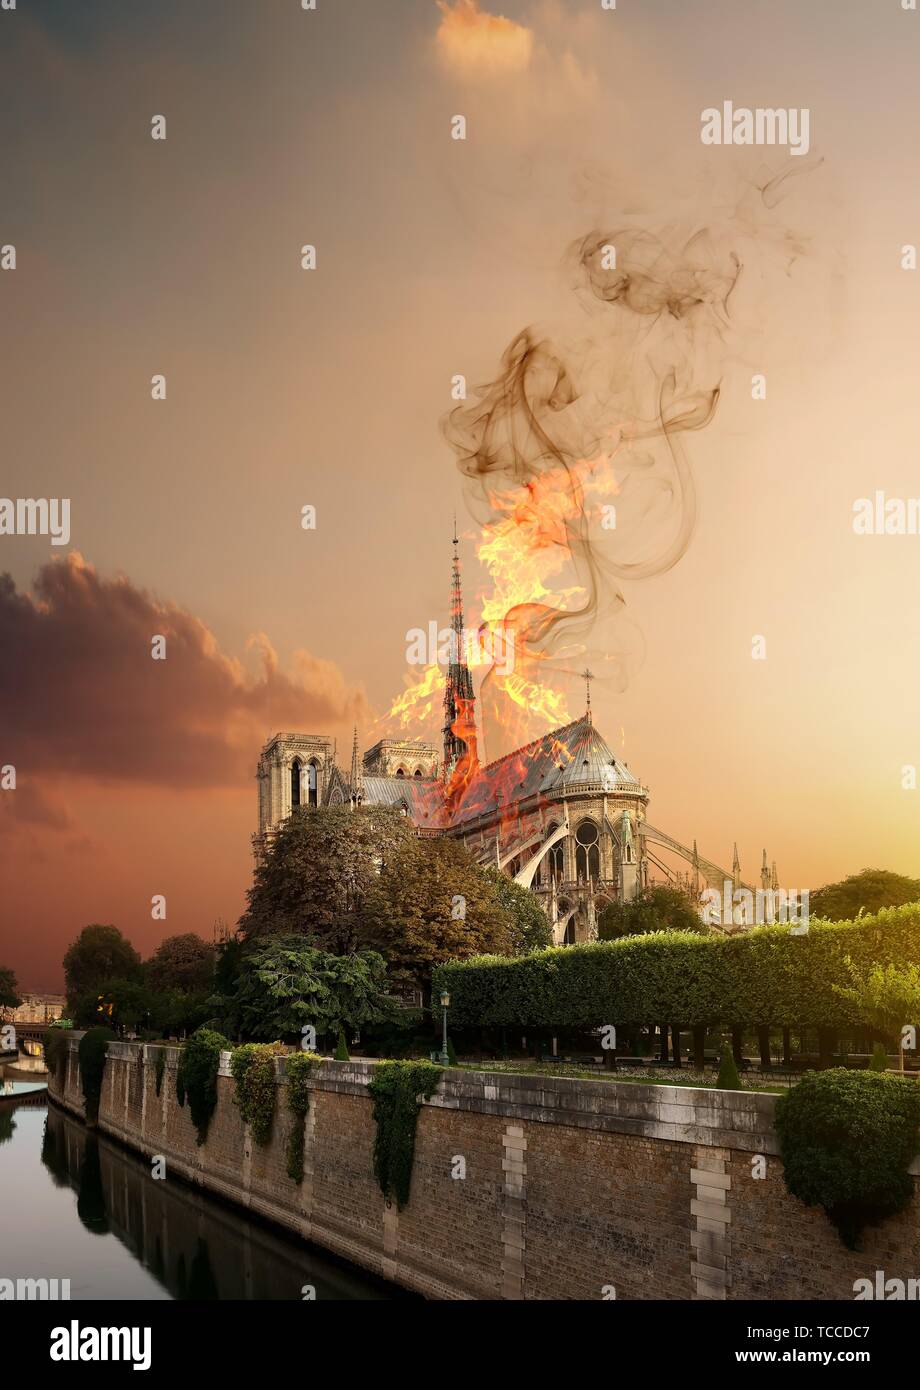 Fire in the Notre Dame Cathedral. Paris, France. Digital composite. Stock Photo